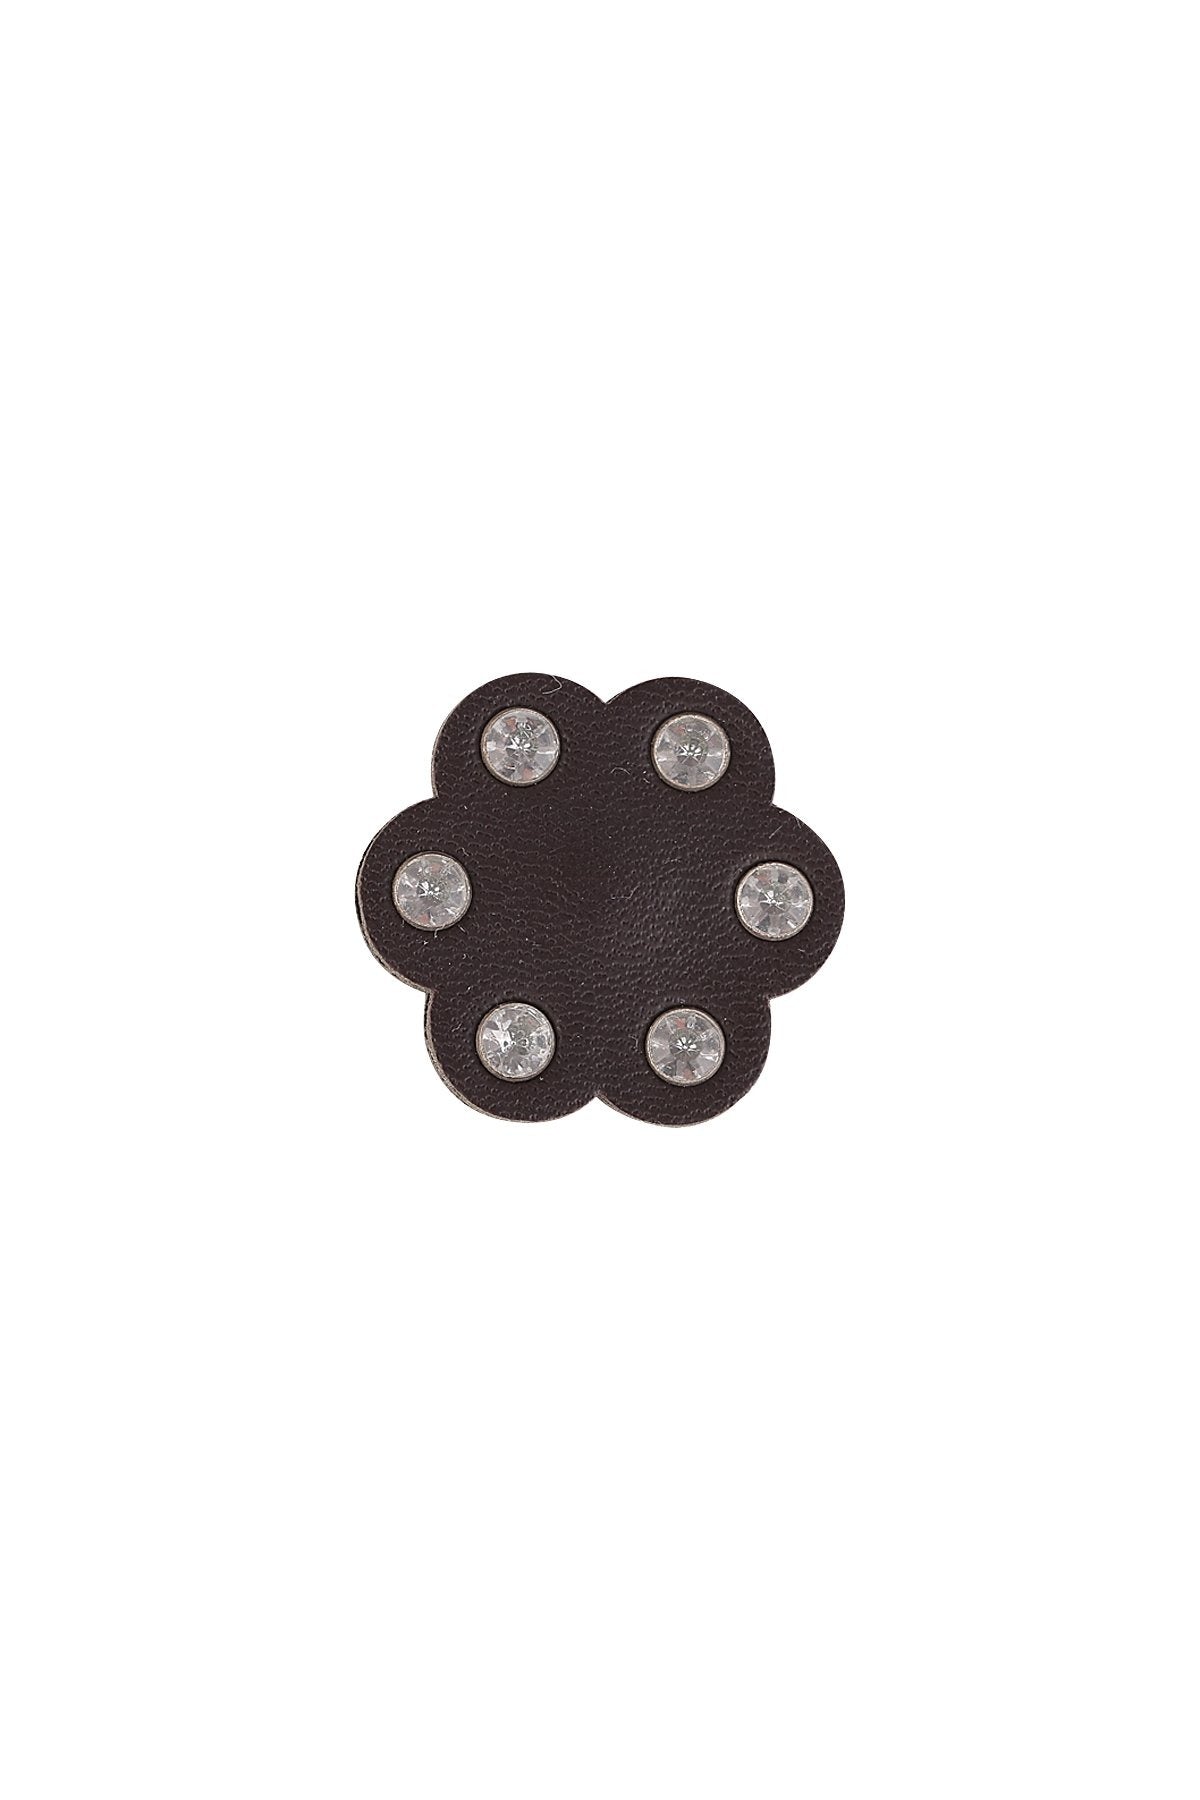 Buy PU Leather Coat Buttons on Jhonea at Best Prices – JHONEA ACCESSORIES